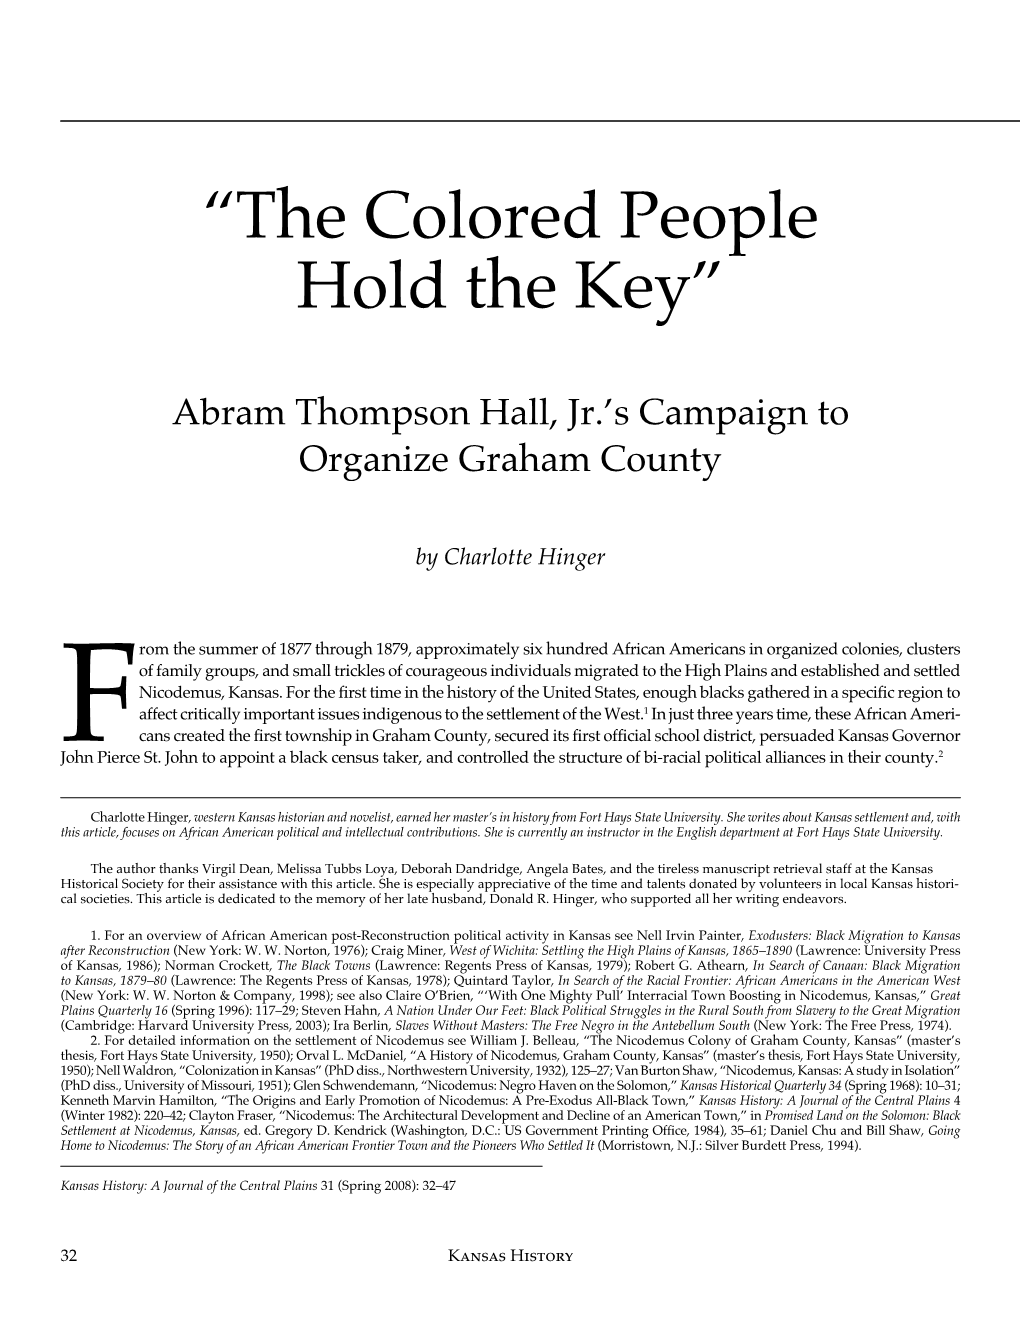 “The Colored People Hold the Key”